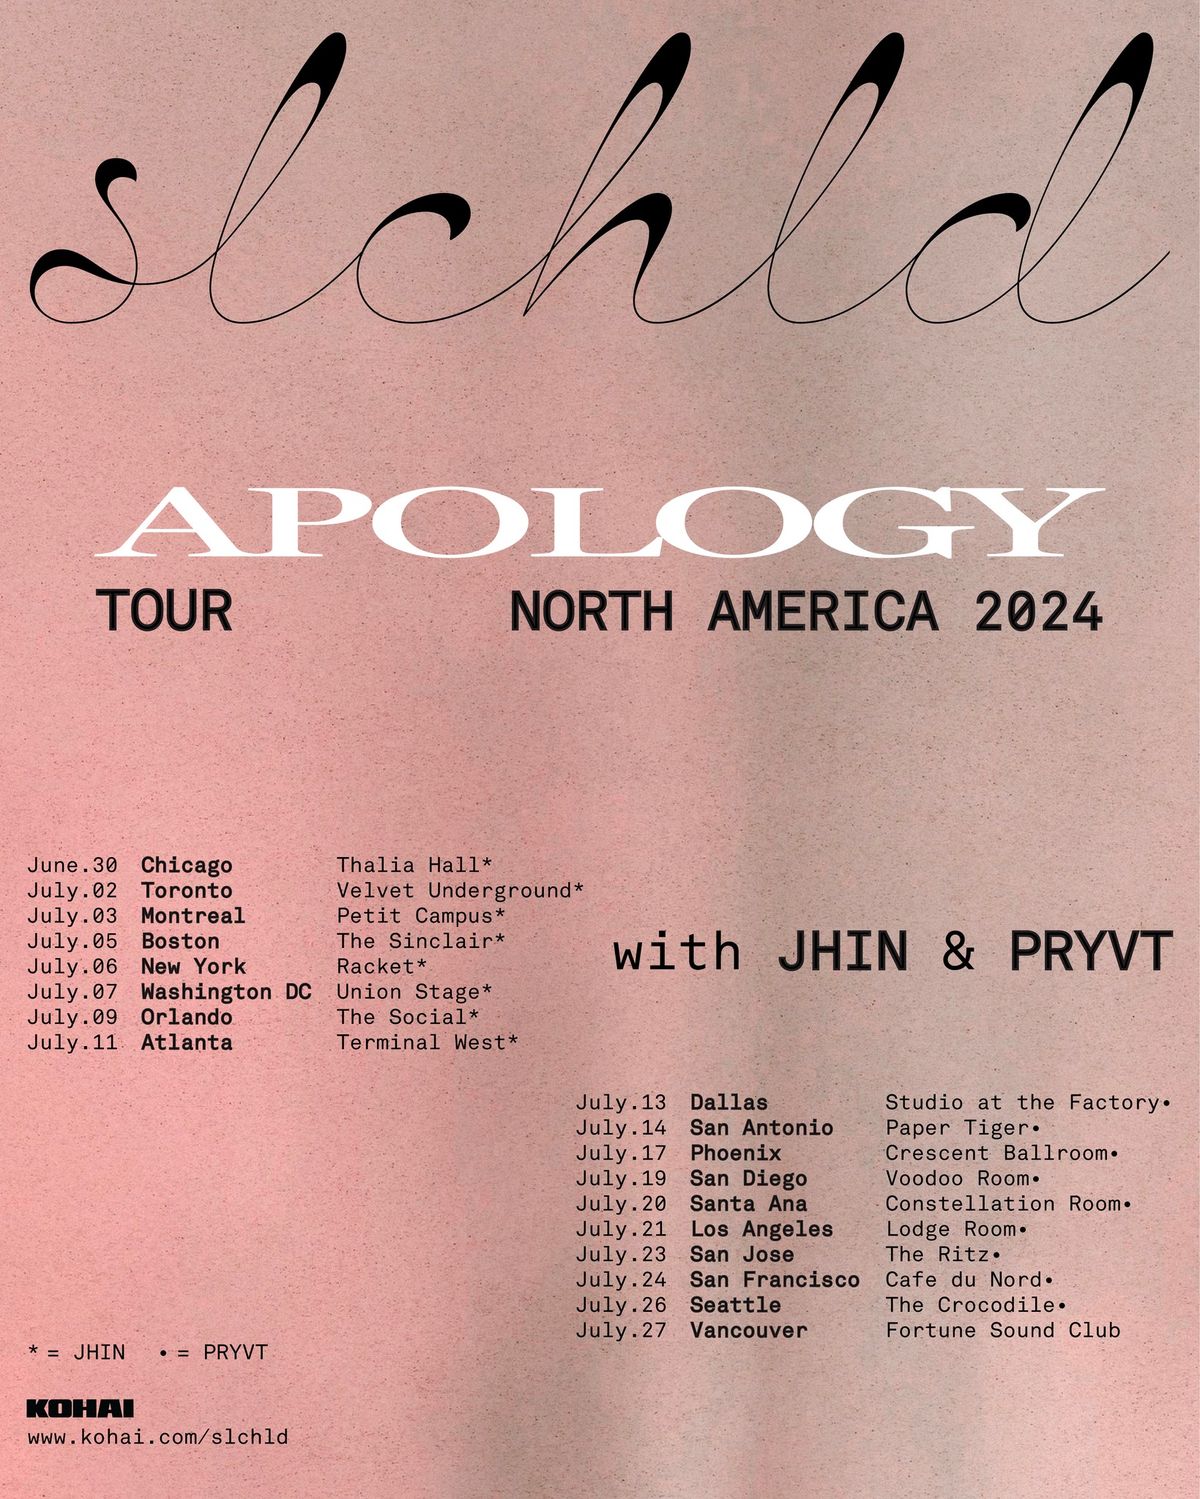 slchld 'Apology' North America Tour - Los Angeles - July 21 at Lodge Room